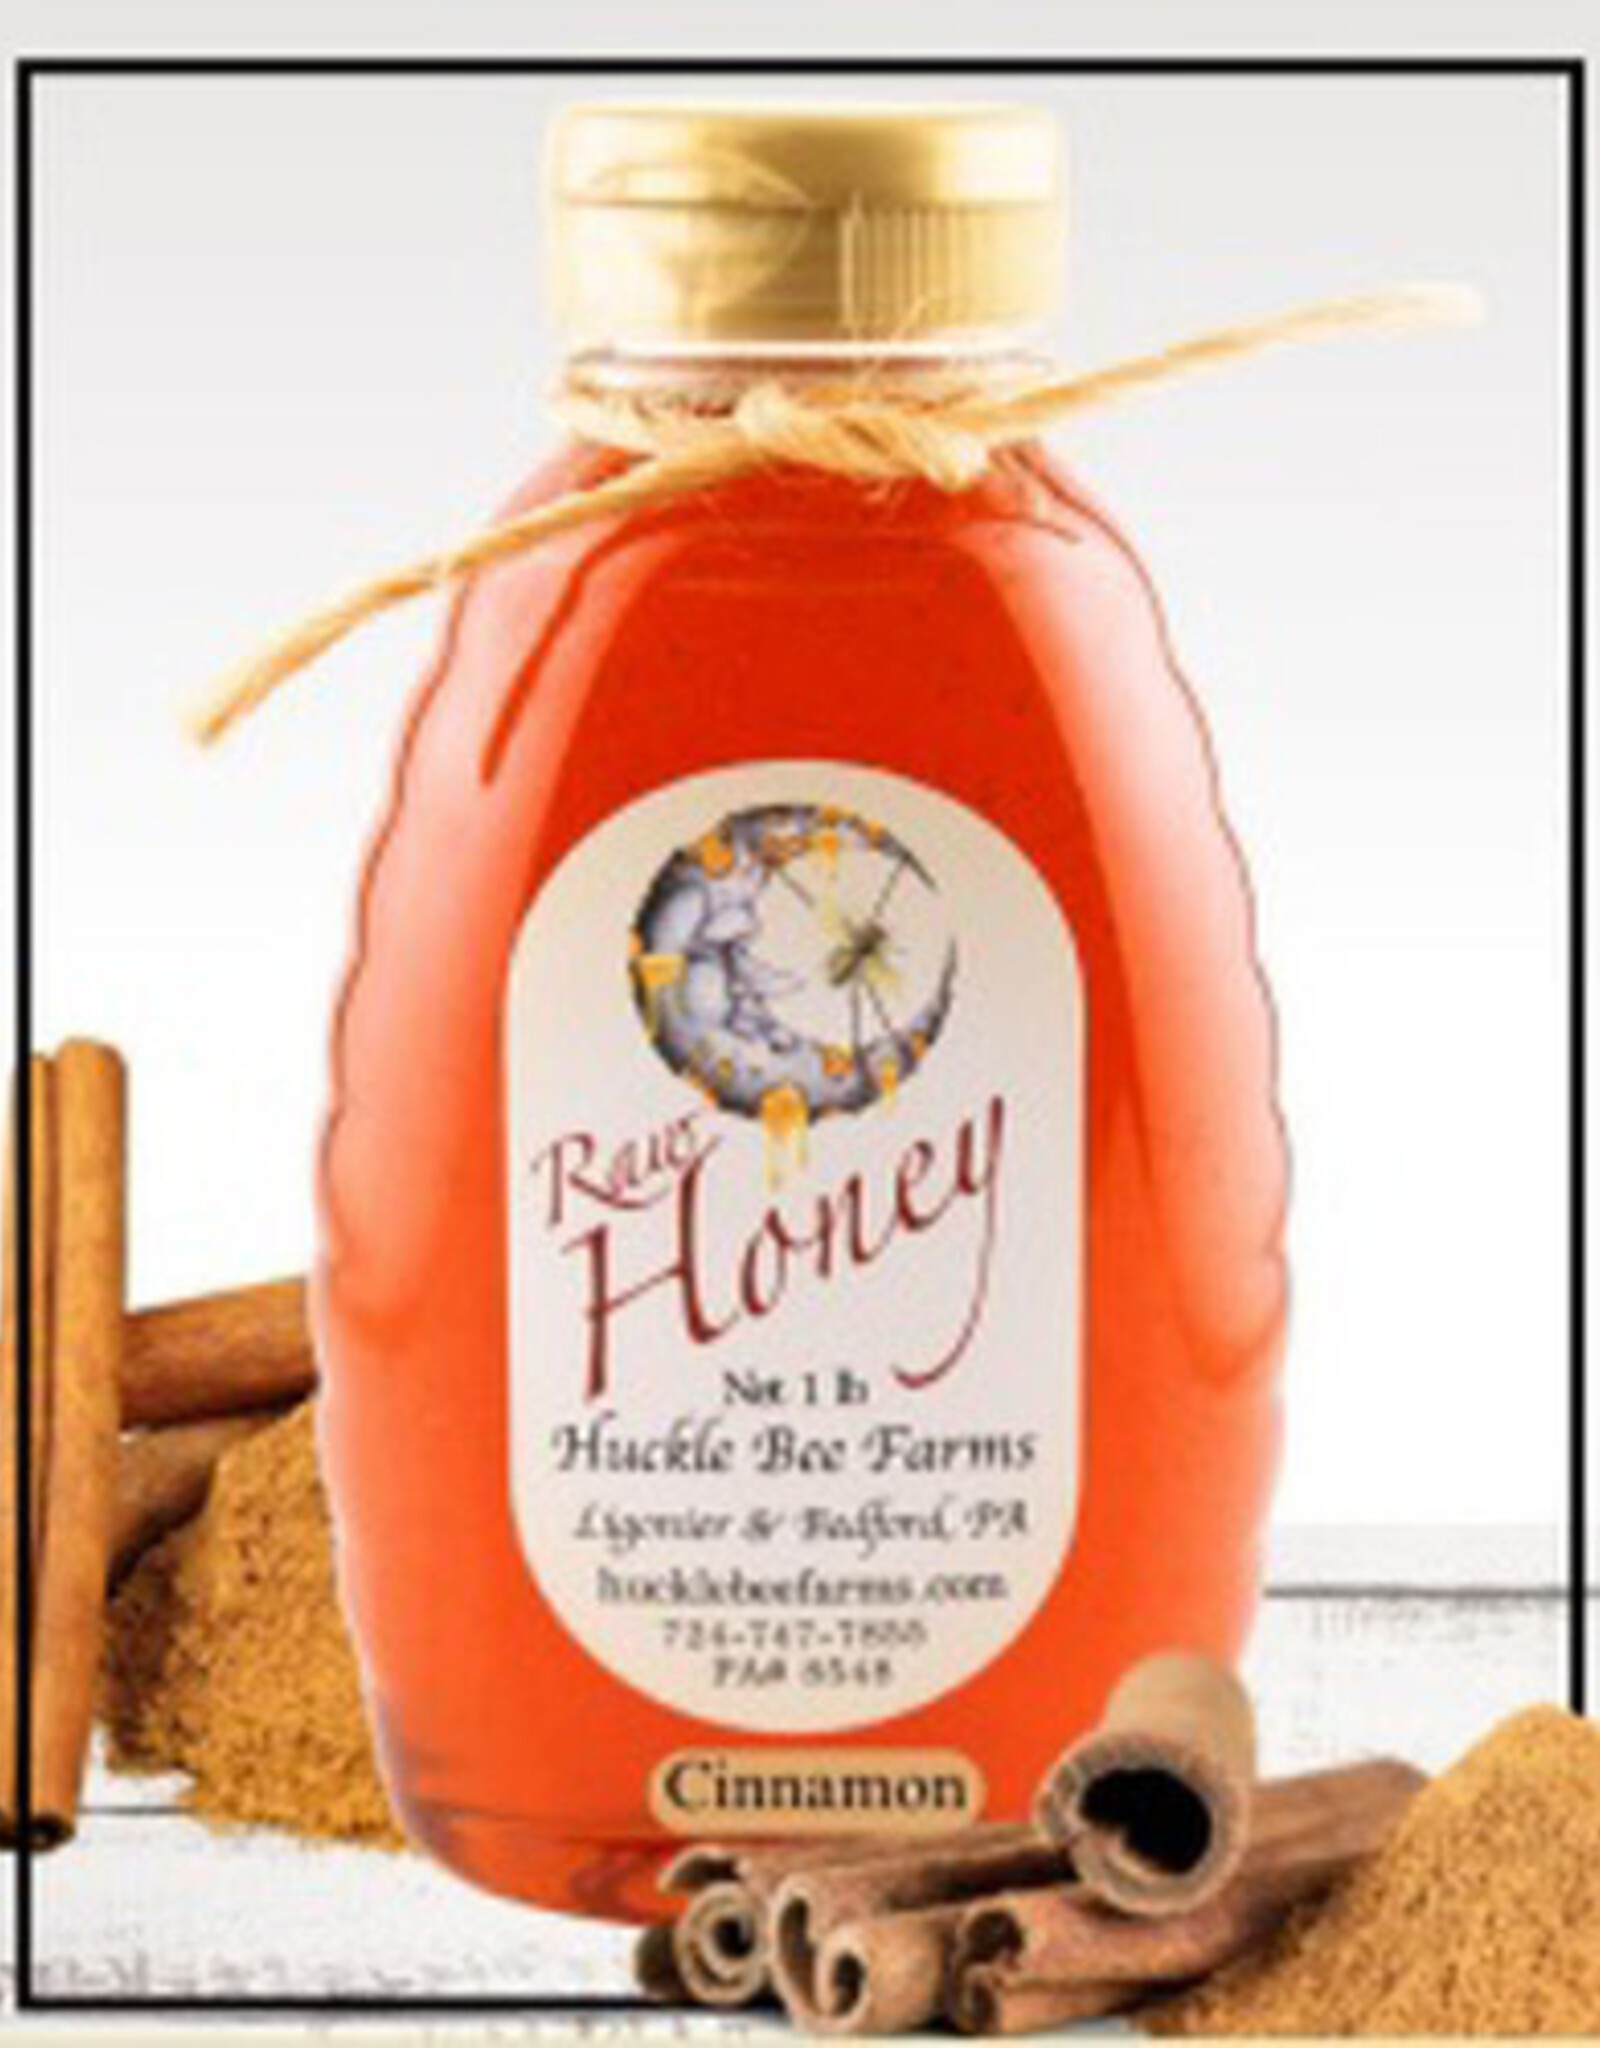 Huckle Bee Farms INFUSED RAW HONEY - Huckle Bee Farms